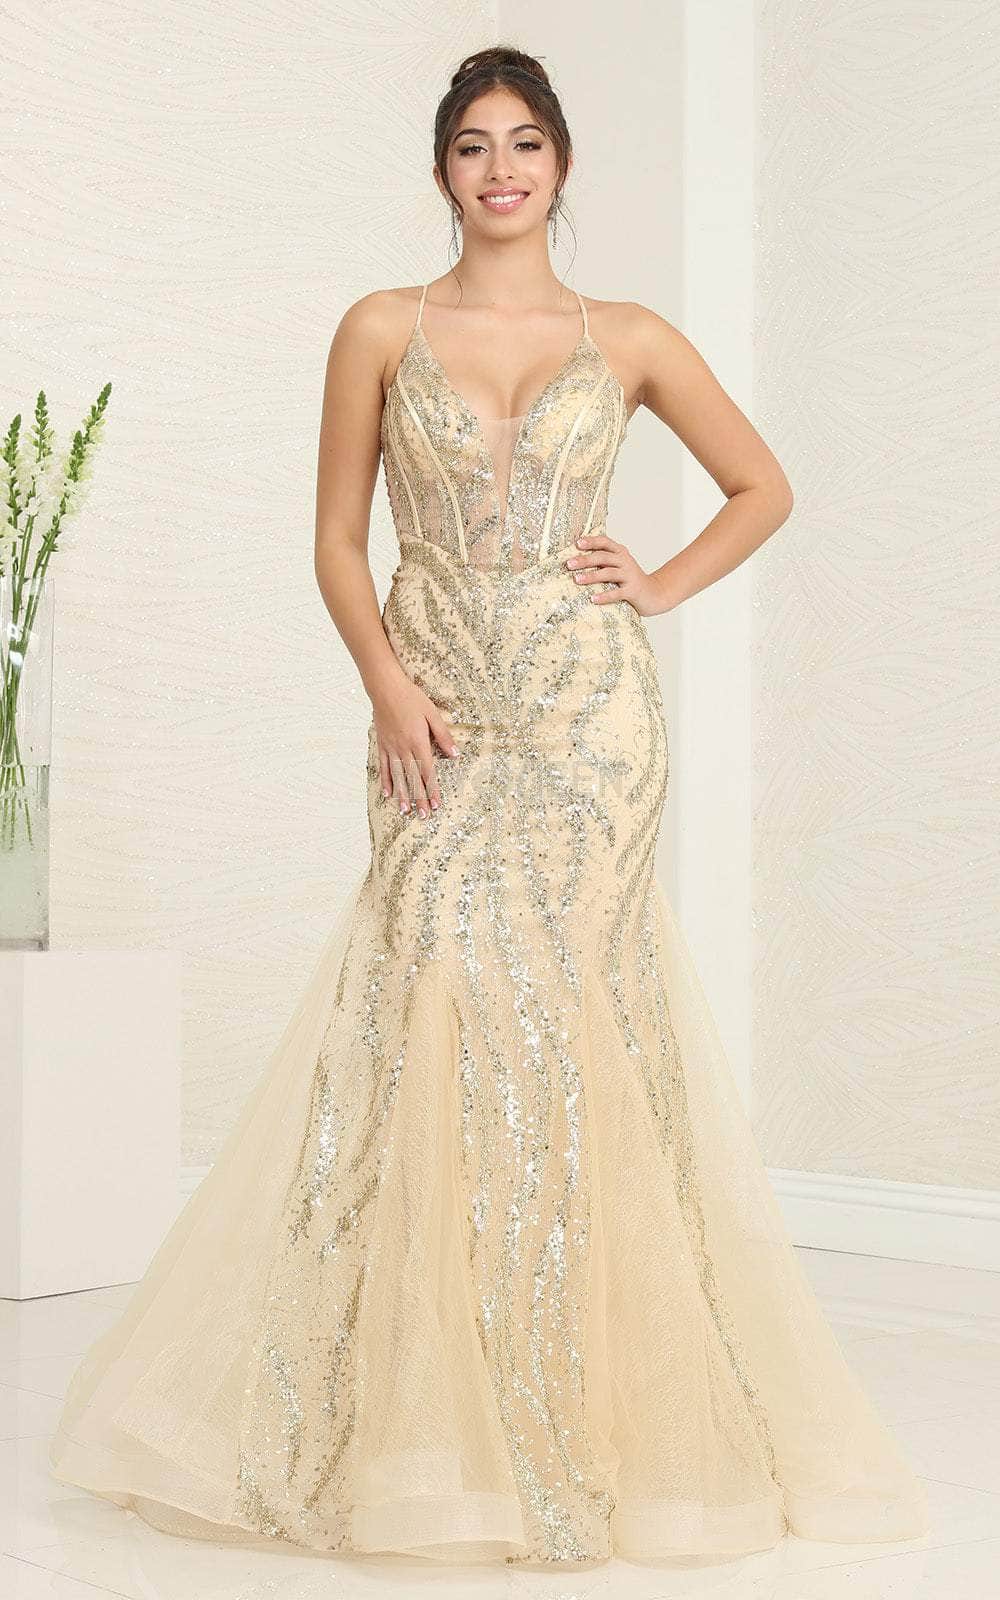 Image of May Queen RQ8078 - Corset Bodice Glittered Prom Gown